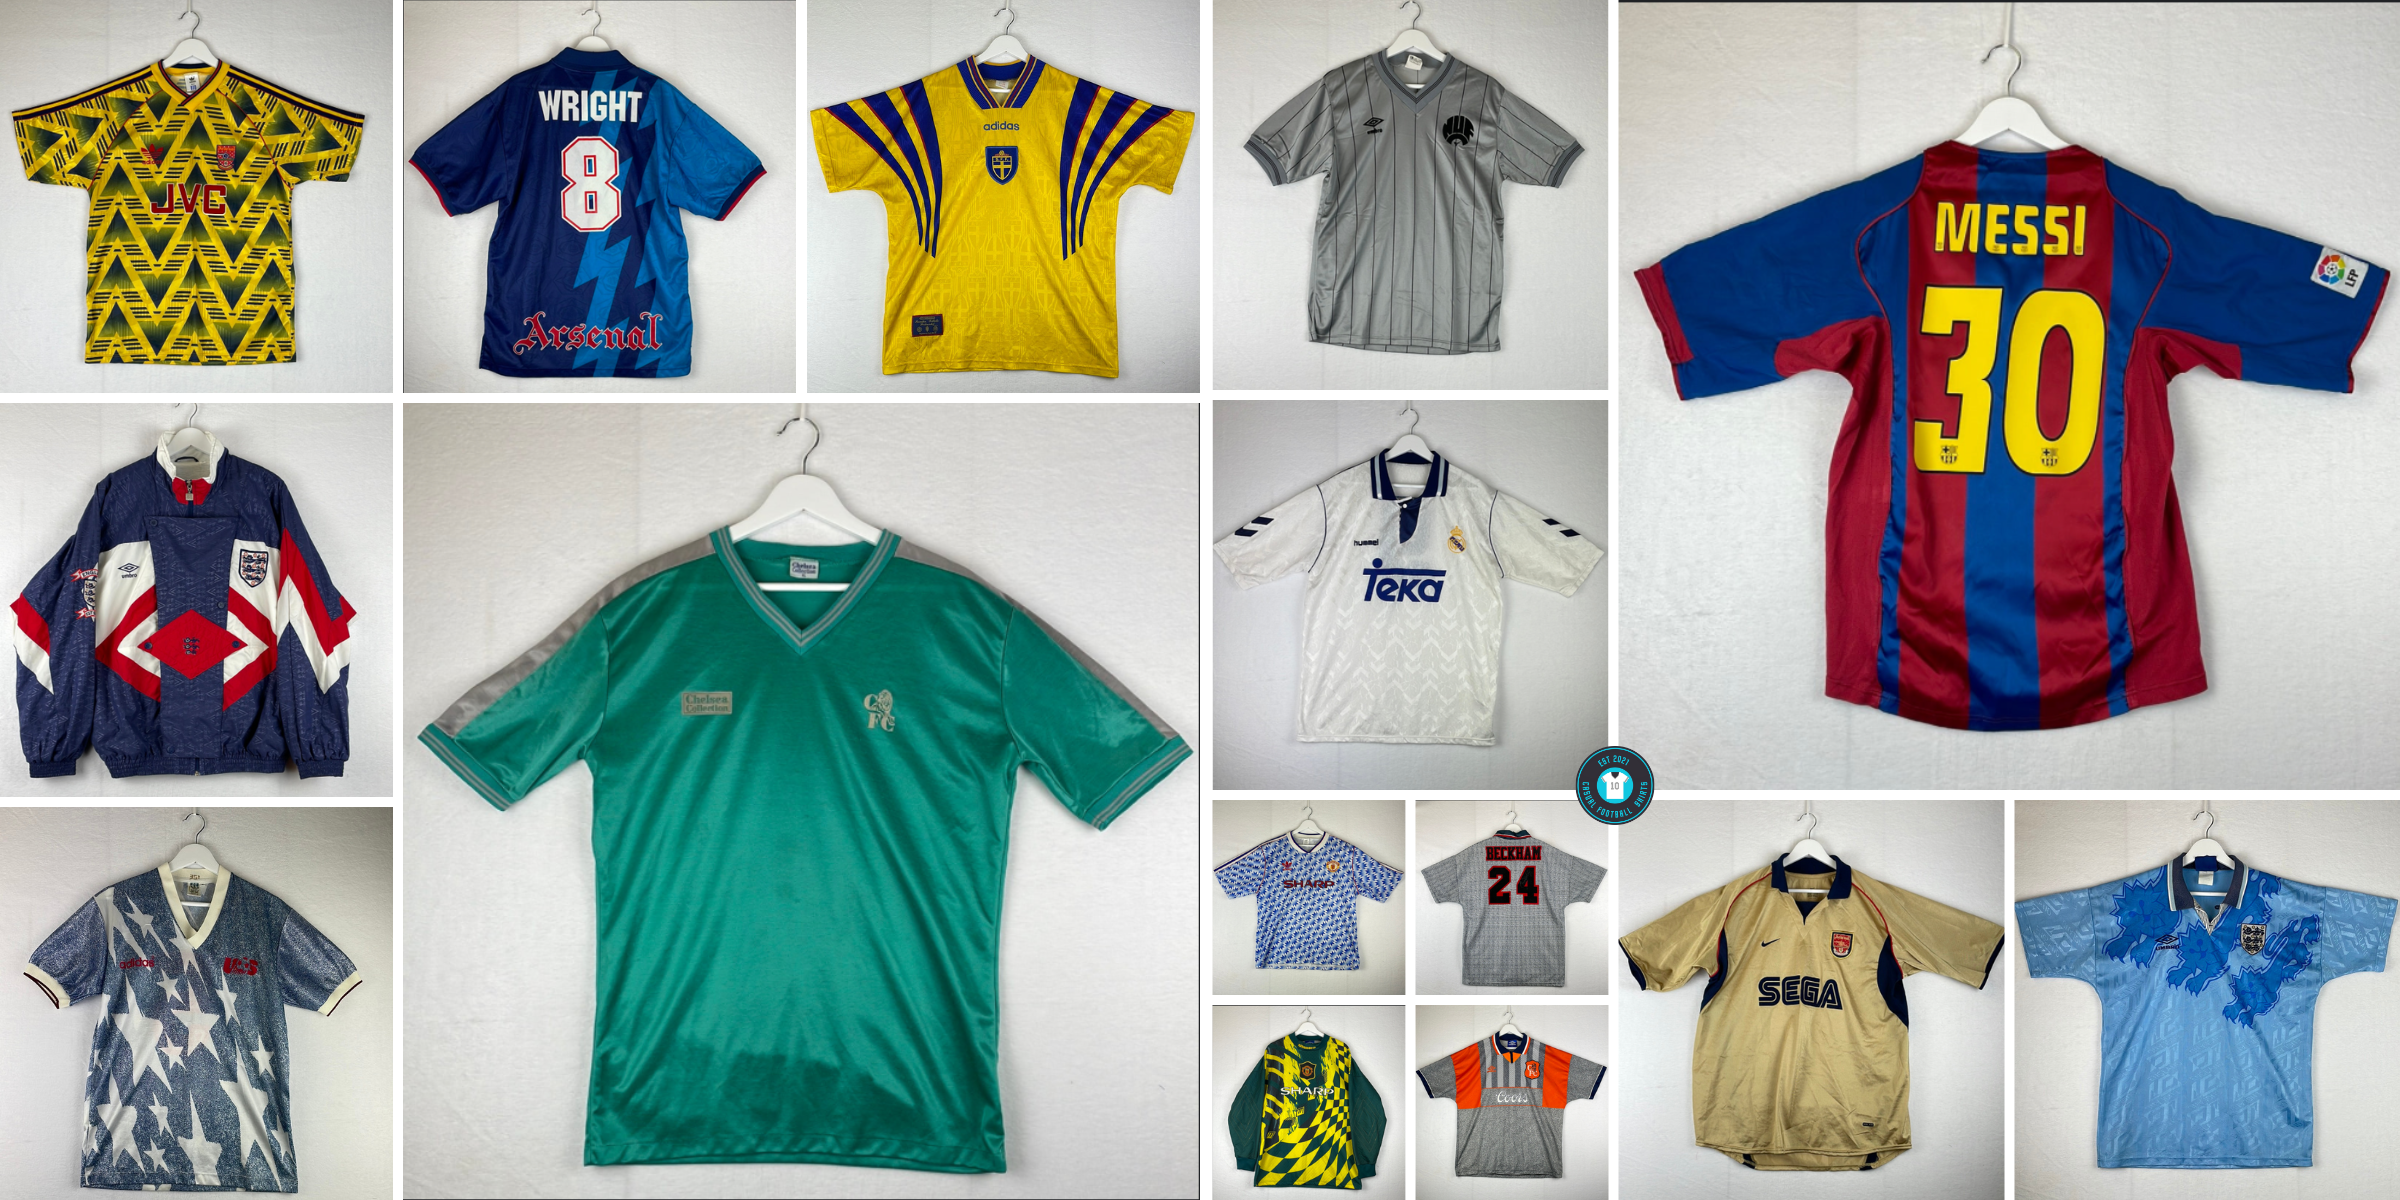 Arsenal vs Liverpool in classic retro football shirts, including